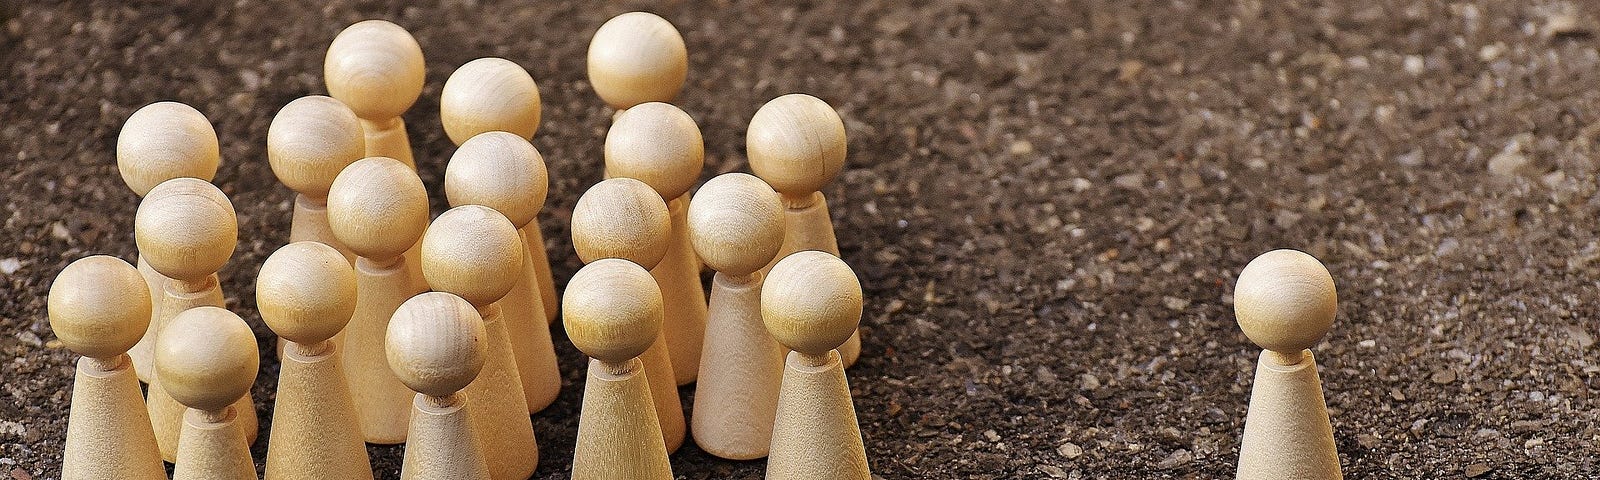 A group of wooden pegs following another wooden peg.